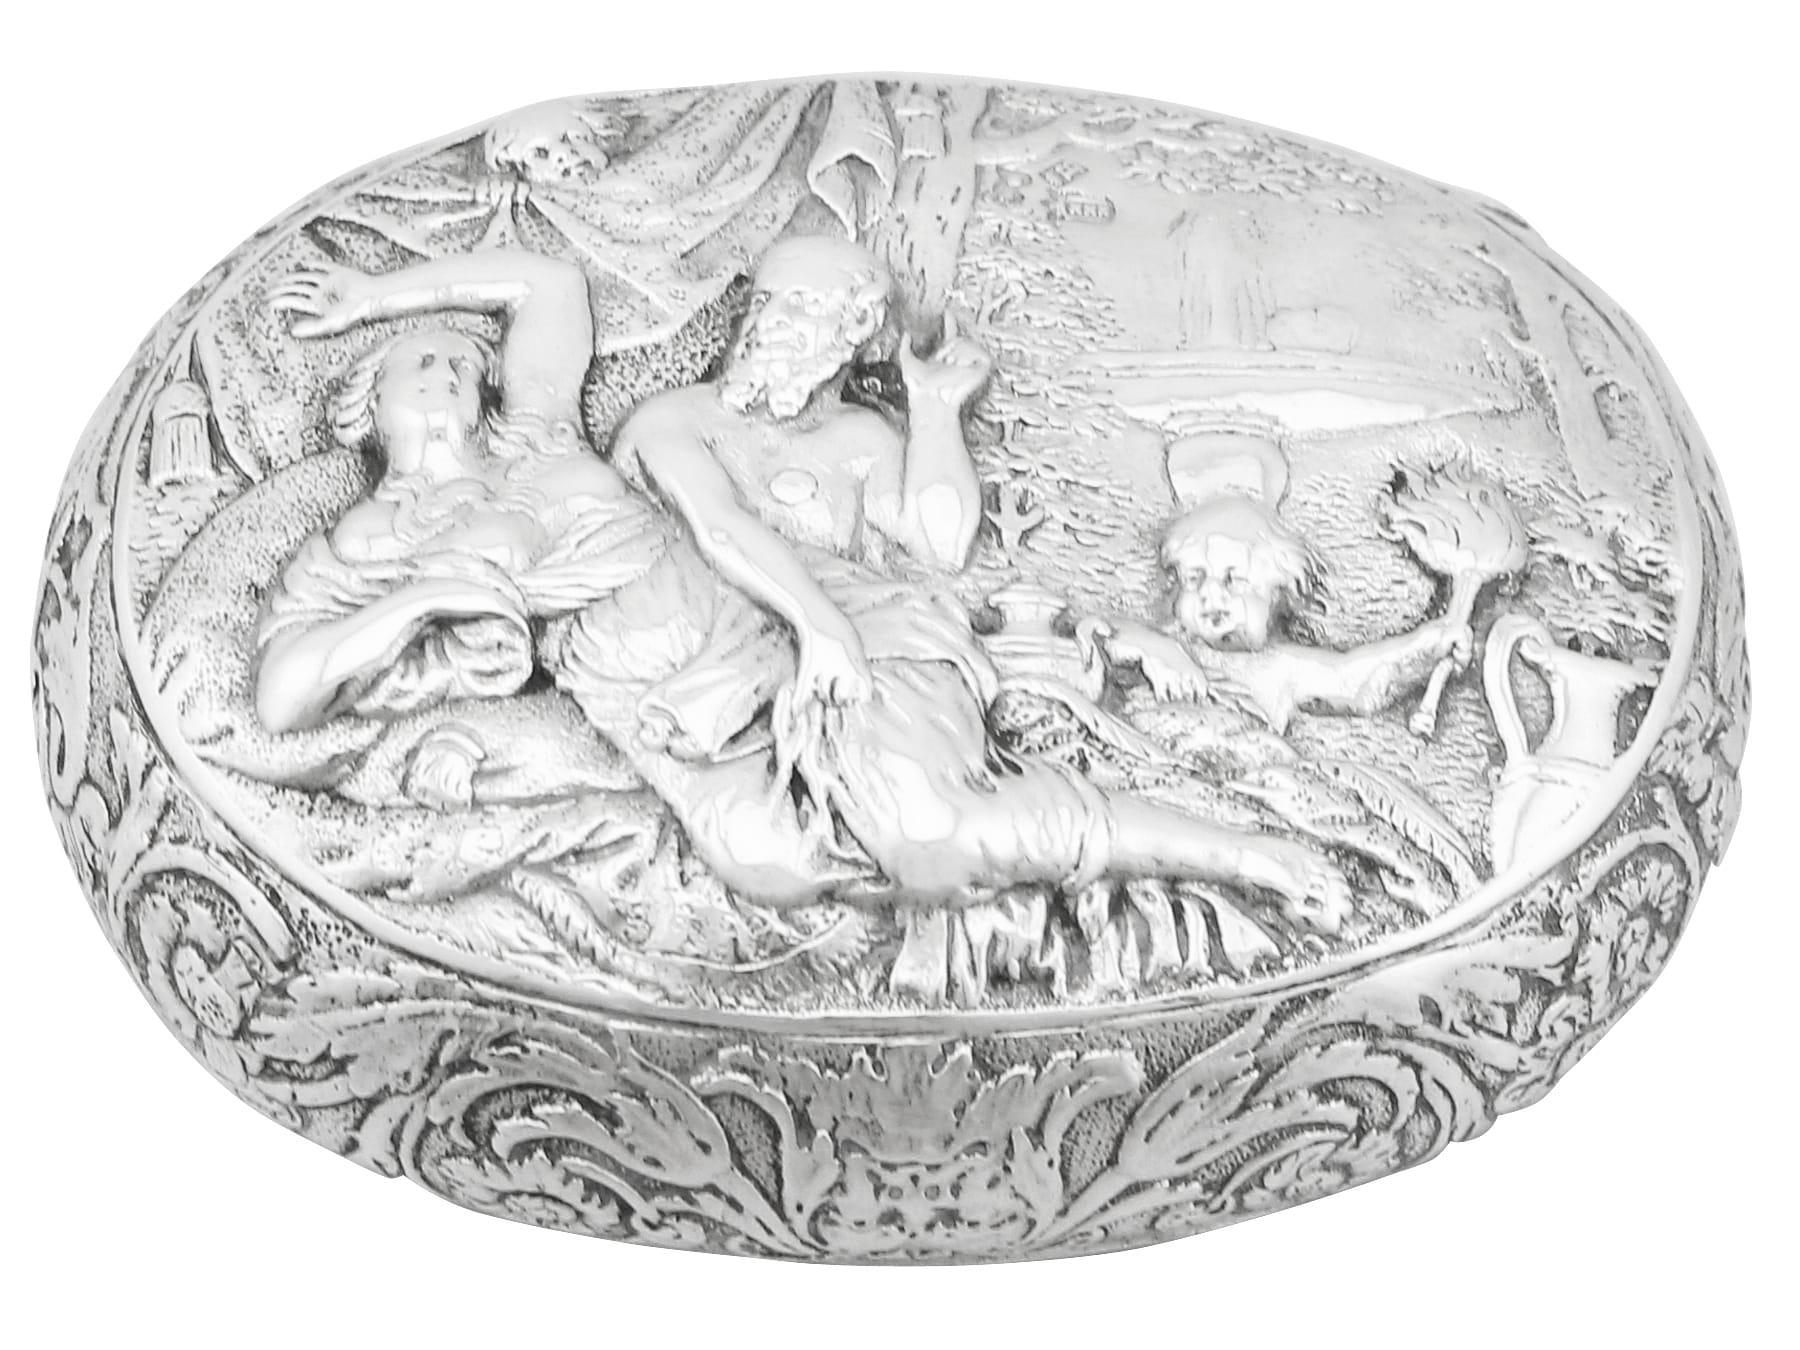 A magnificent, exceptional, fine and impressive, rare antique 17th century Dutch silver tobacco box; an addition to our smoking related silverware collection.

This exceptional antique Dutch silver tobacco box has an oval rounded form.

The